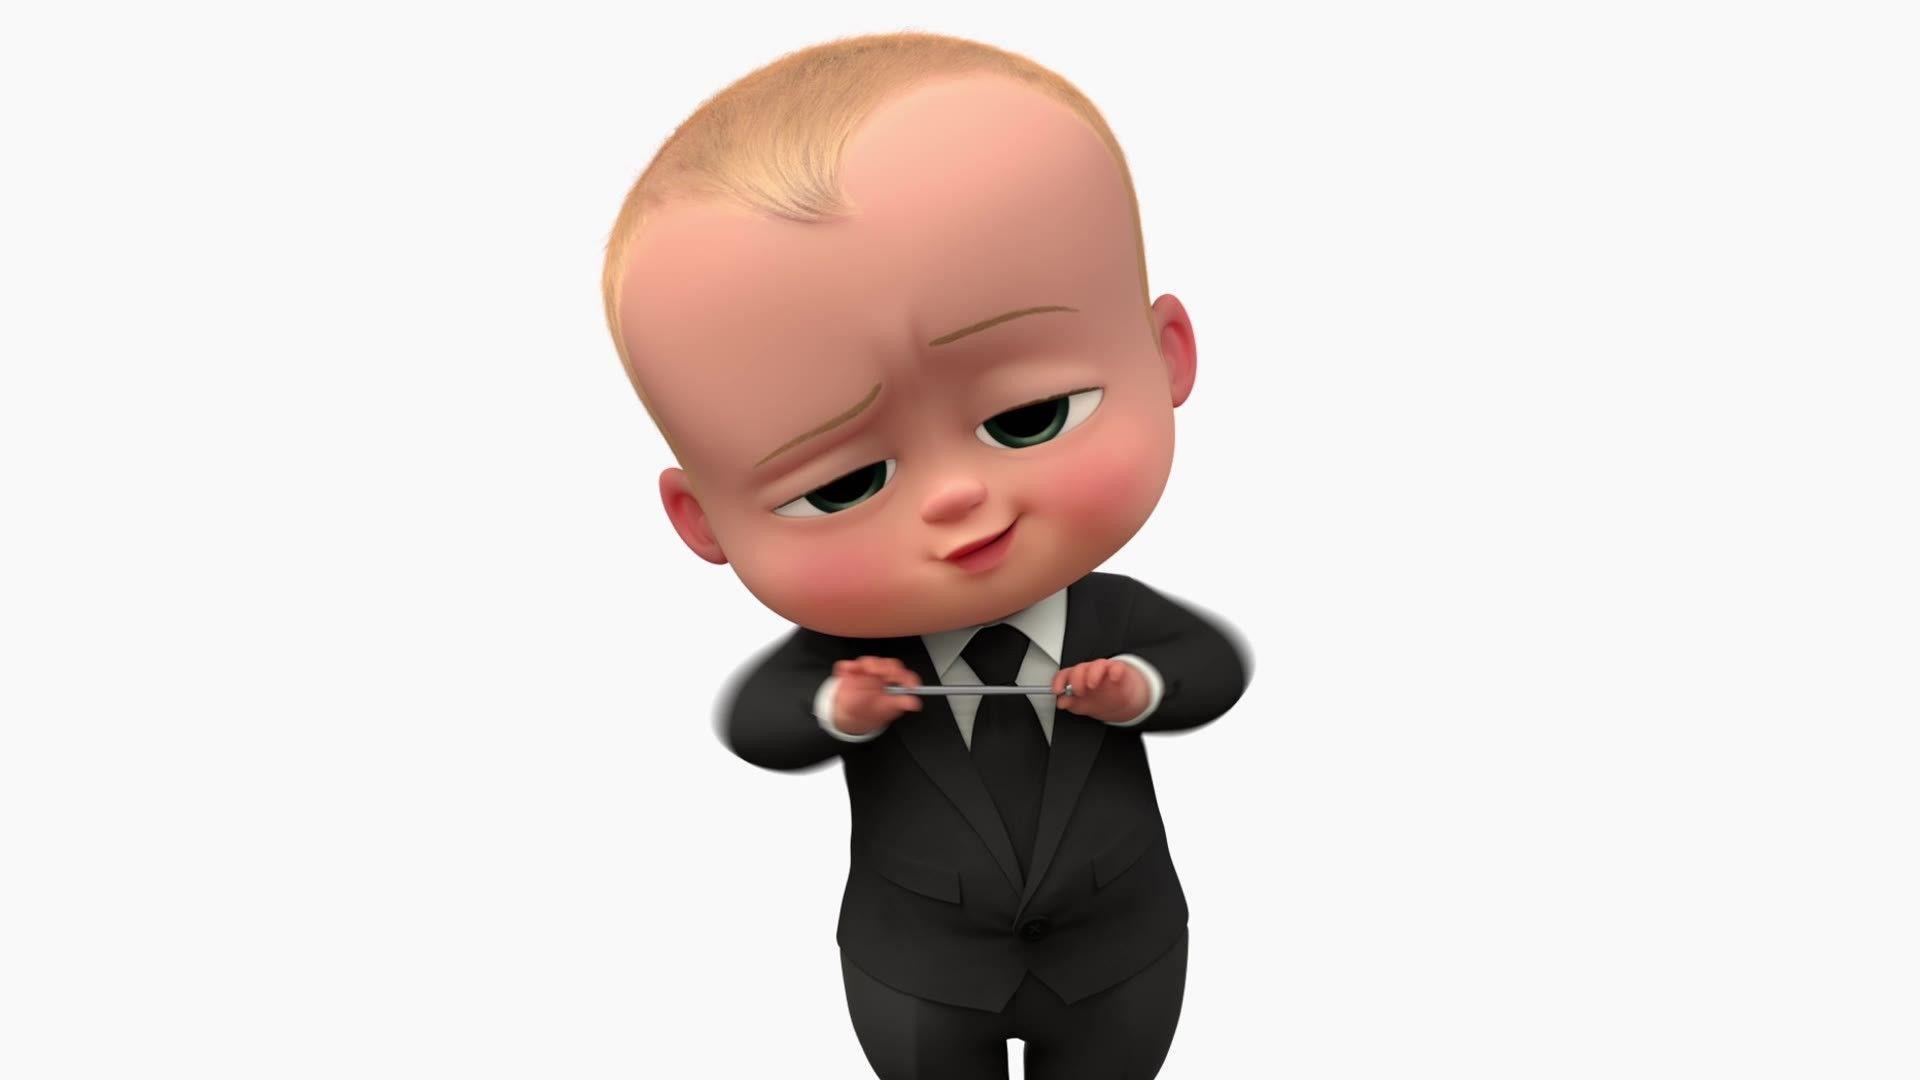 The Boss Baby Wallpapers - Wallpaper Cave